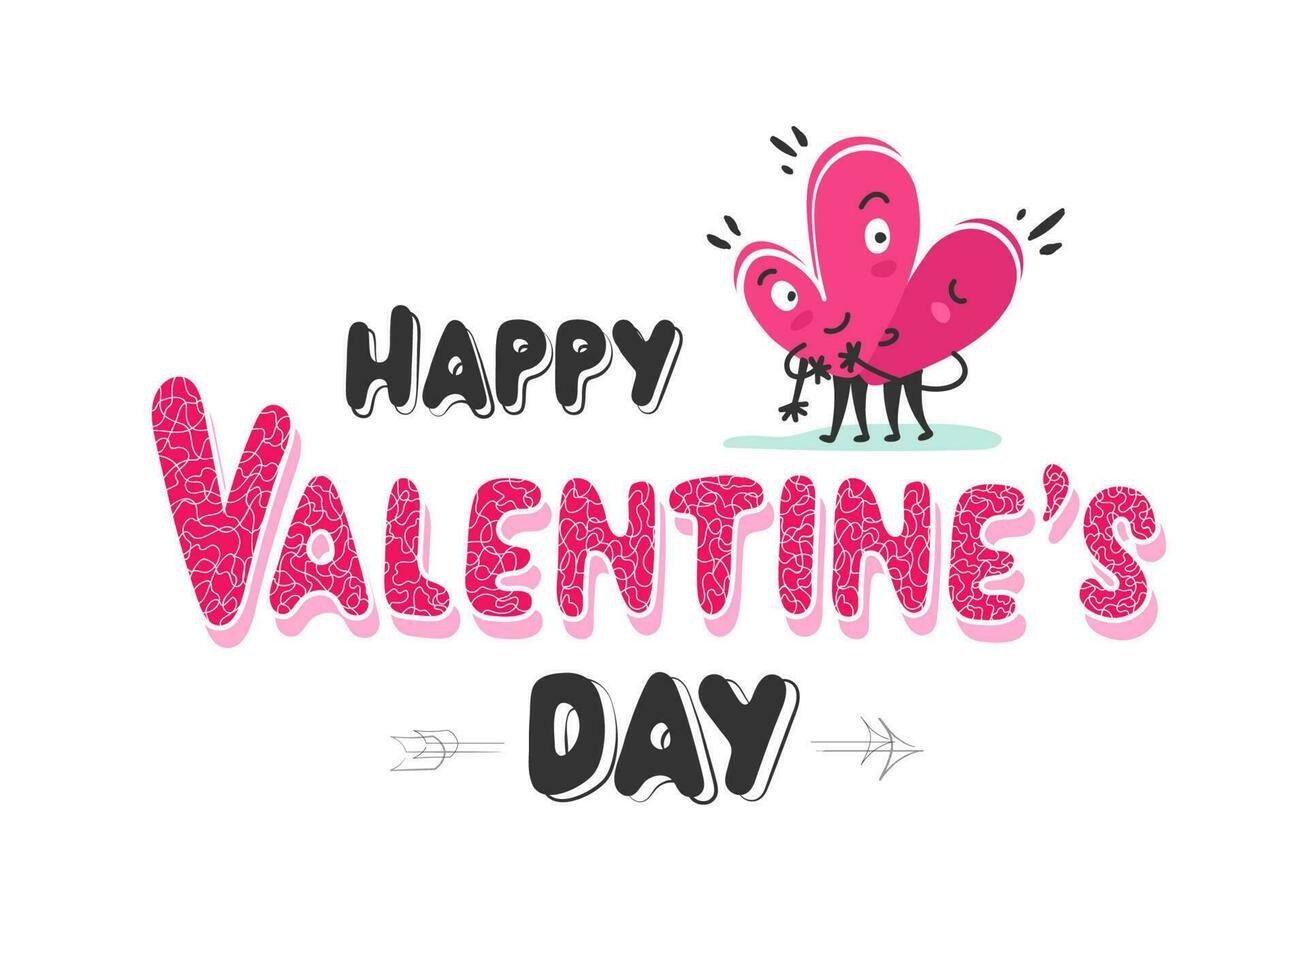 Happy Valentine's Day Text with Cartoon Hearts Couple Hugging on White Background. vector